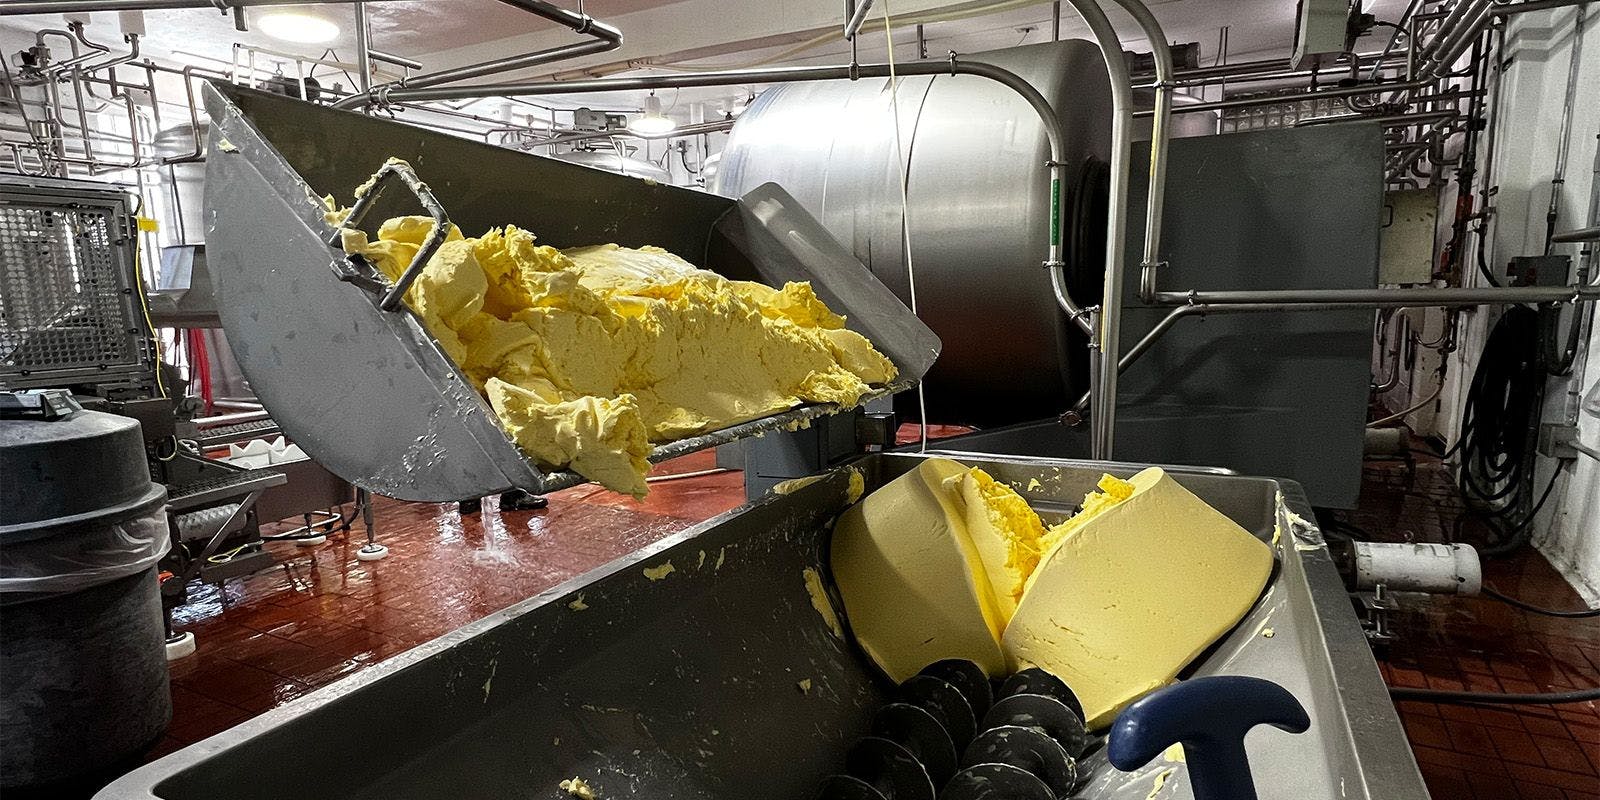 Organic butter is processed at the Chaseburg Creamery in Wisconsin.